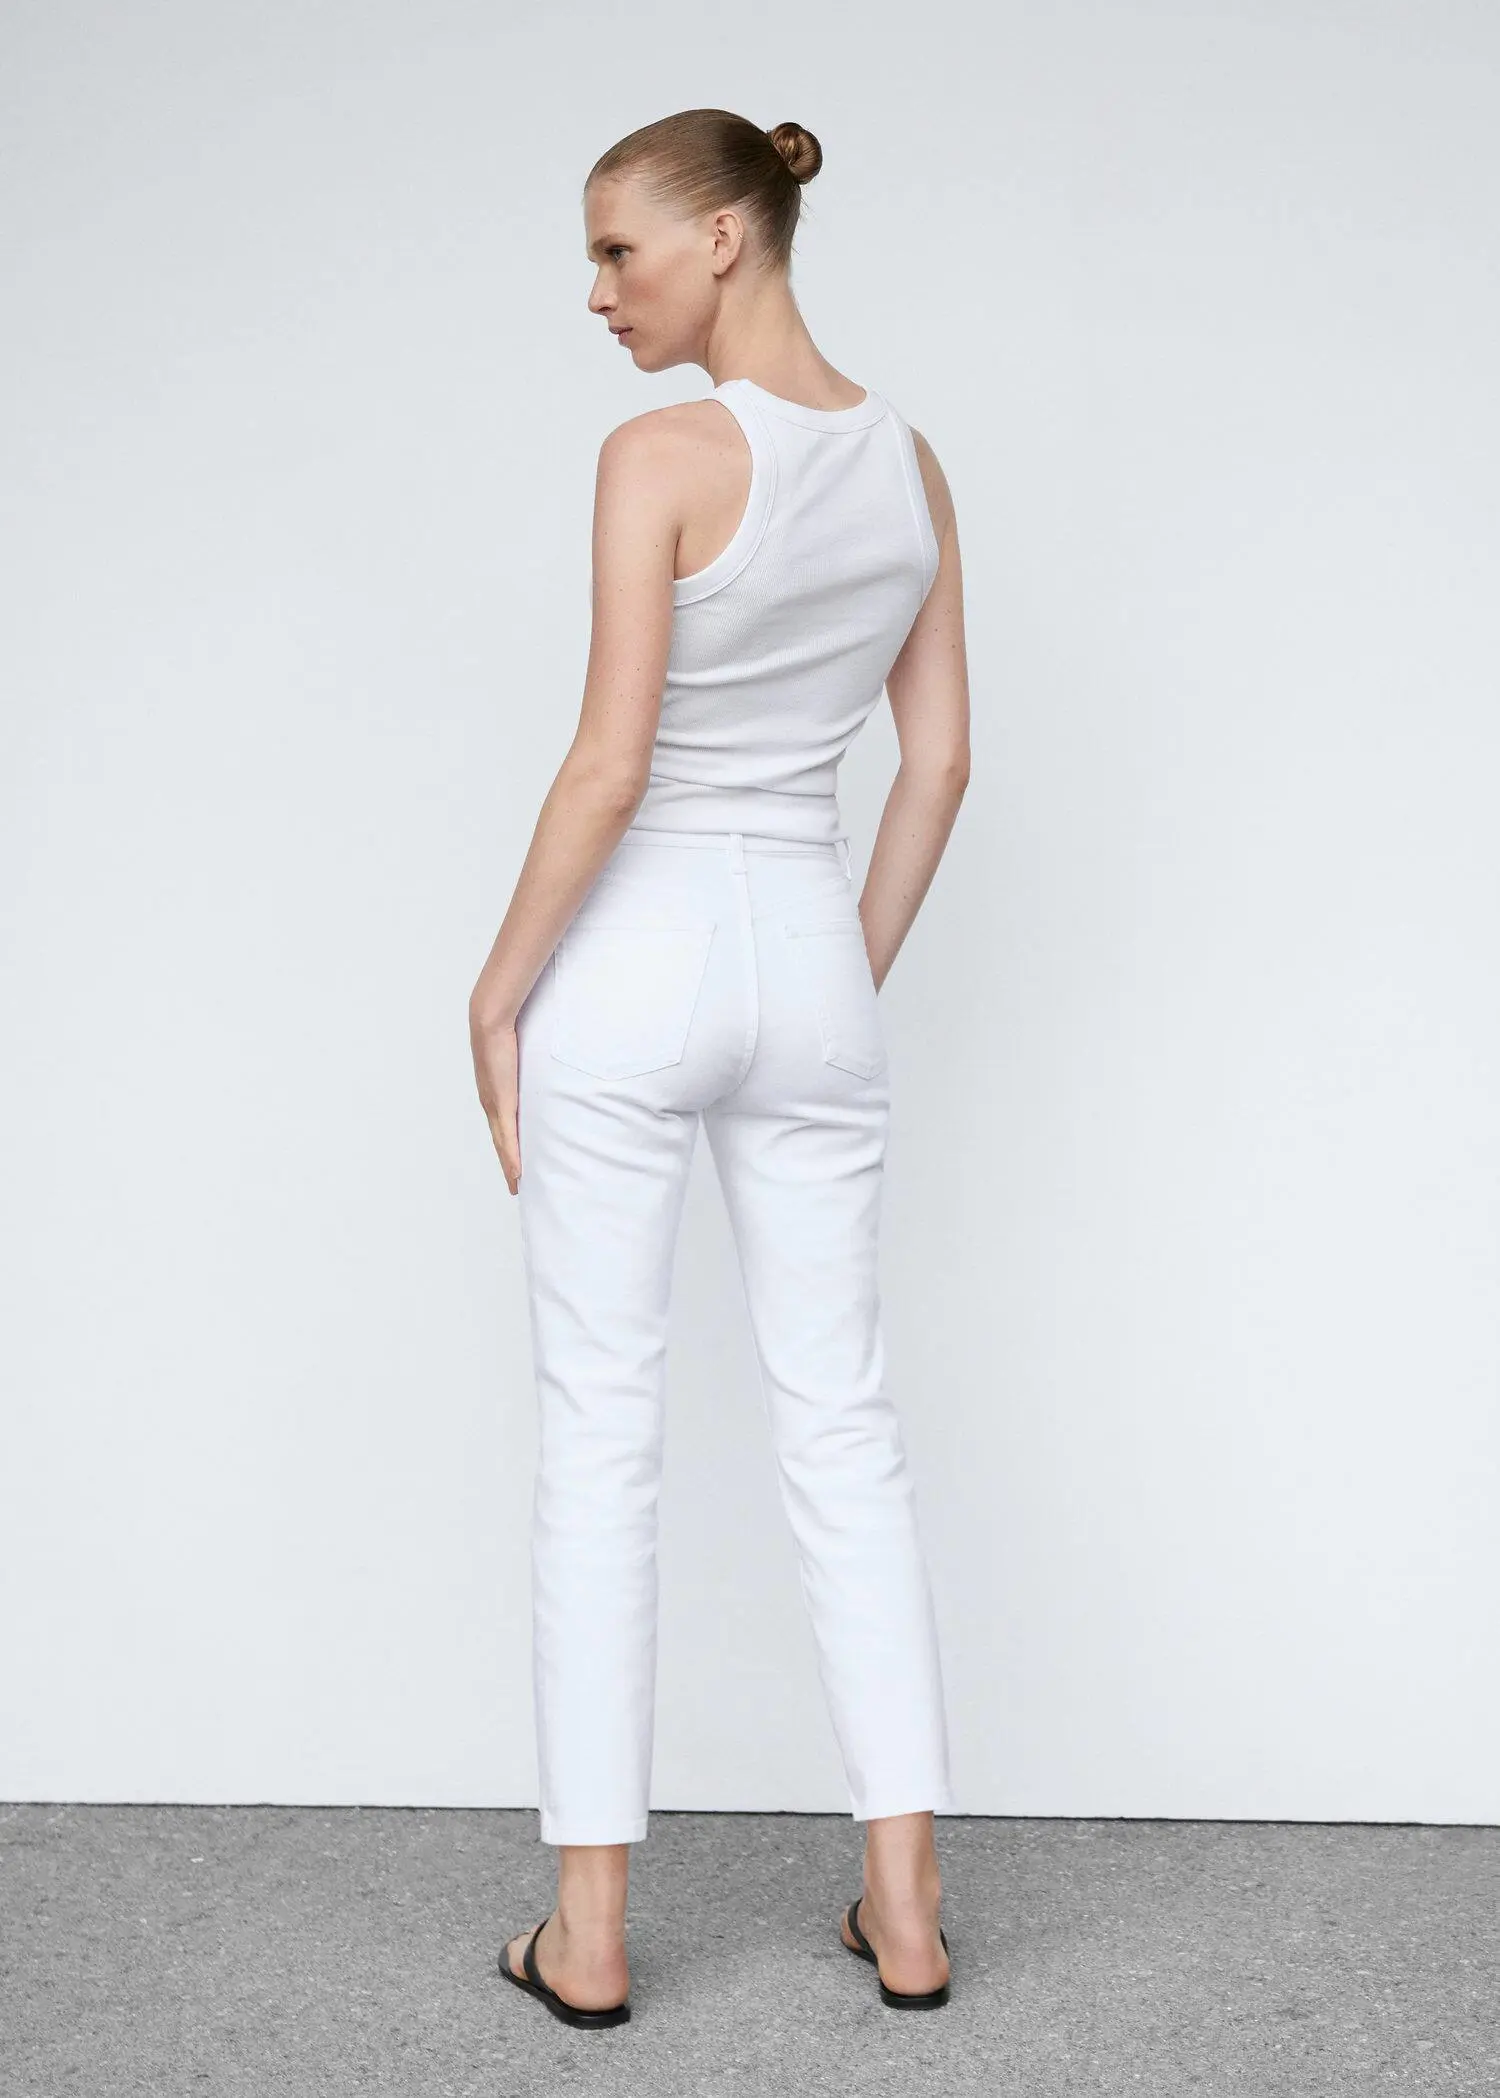 Mango Slim cropped jeans. a woman wearing all white is standing in front of a white wall. 